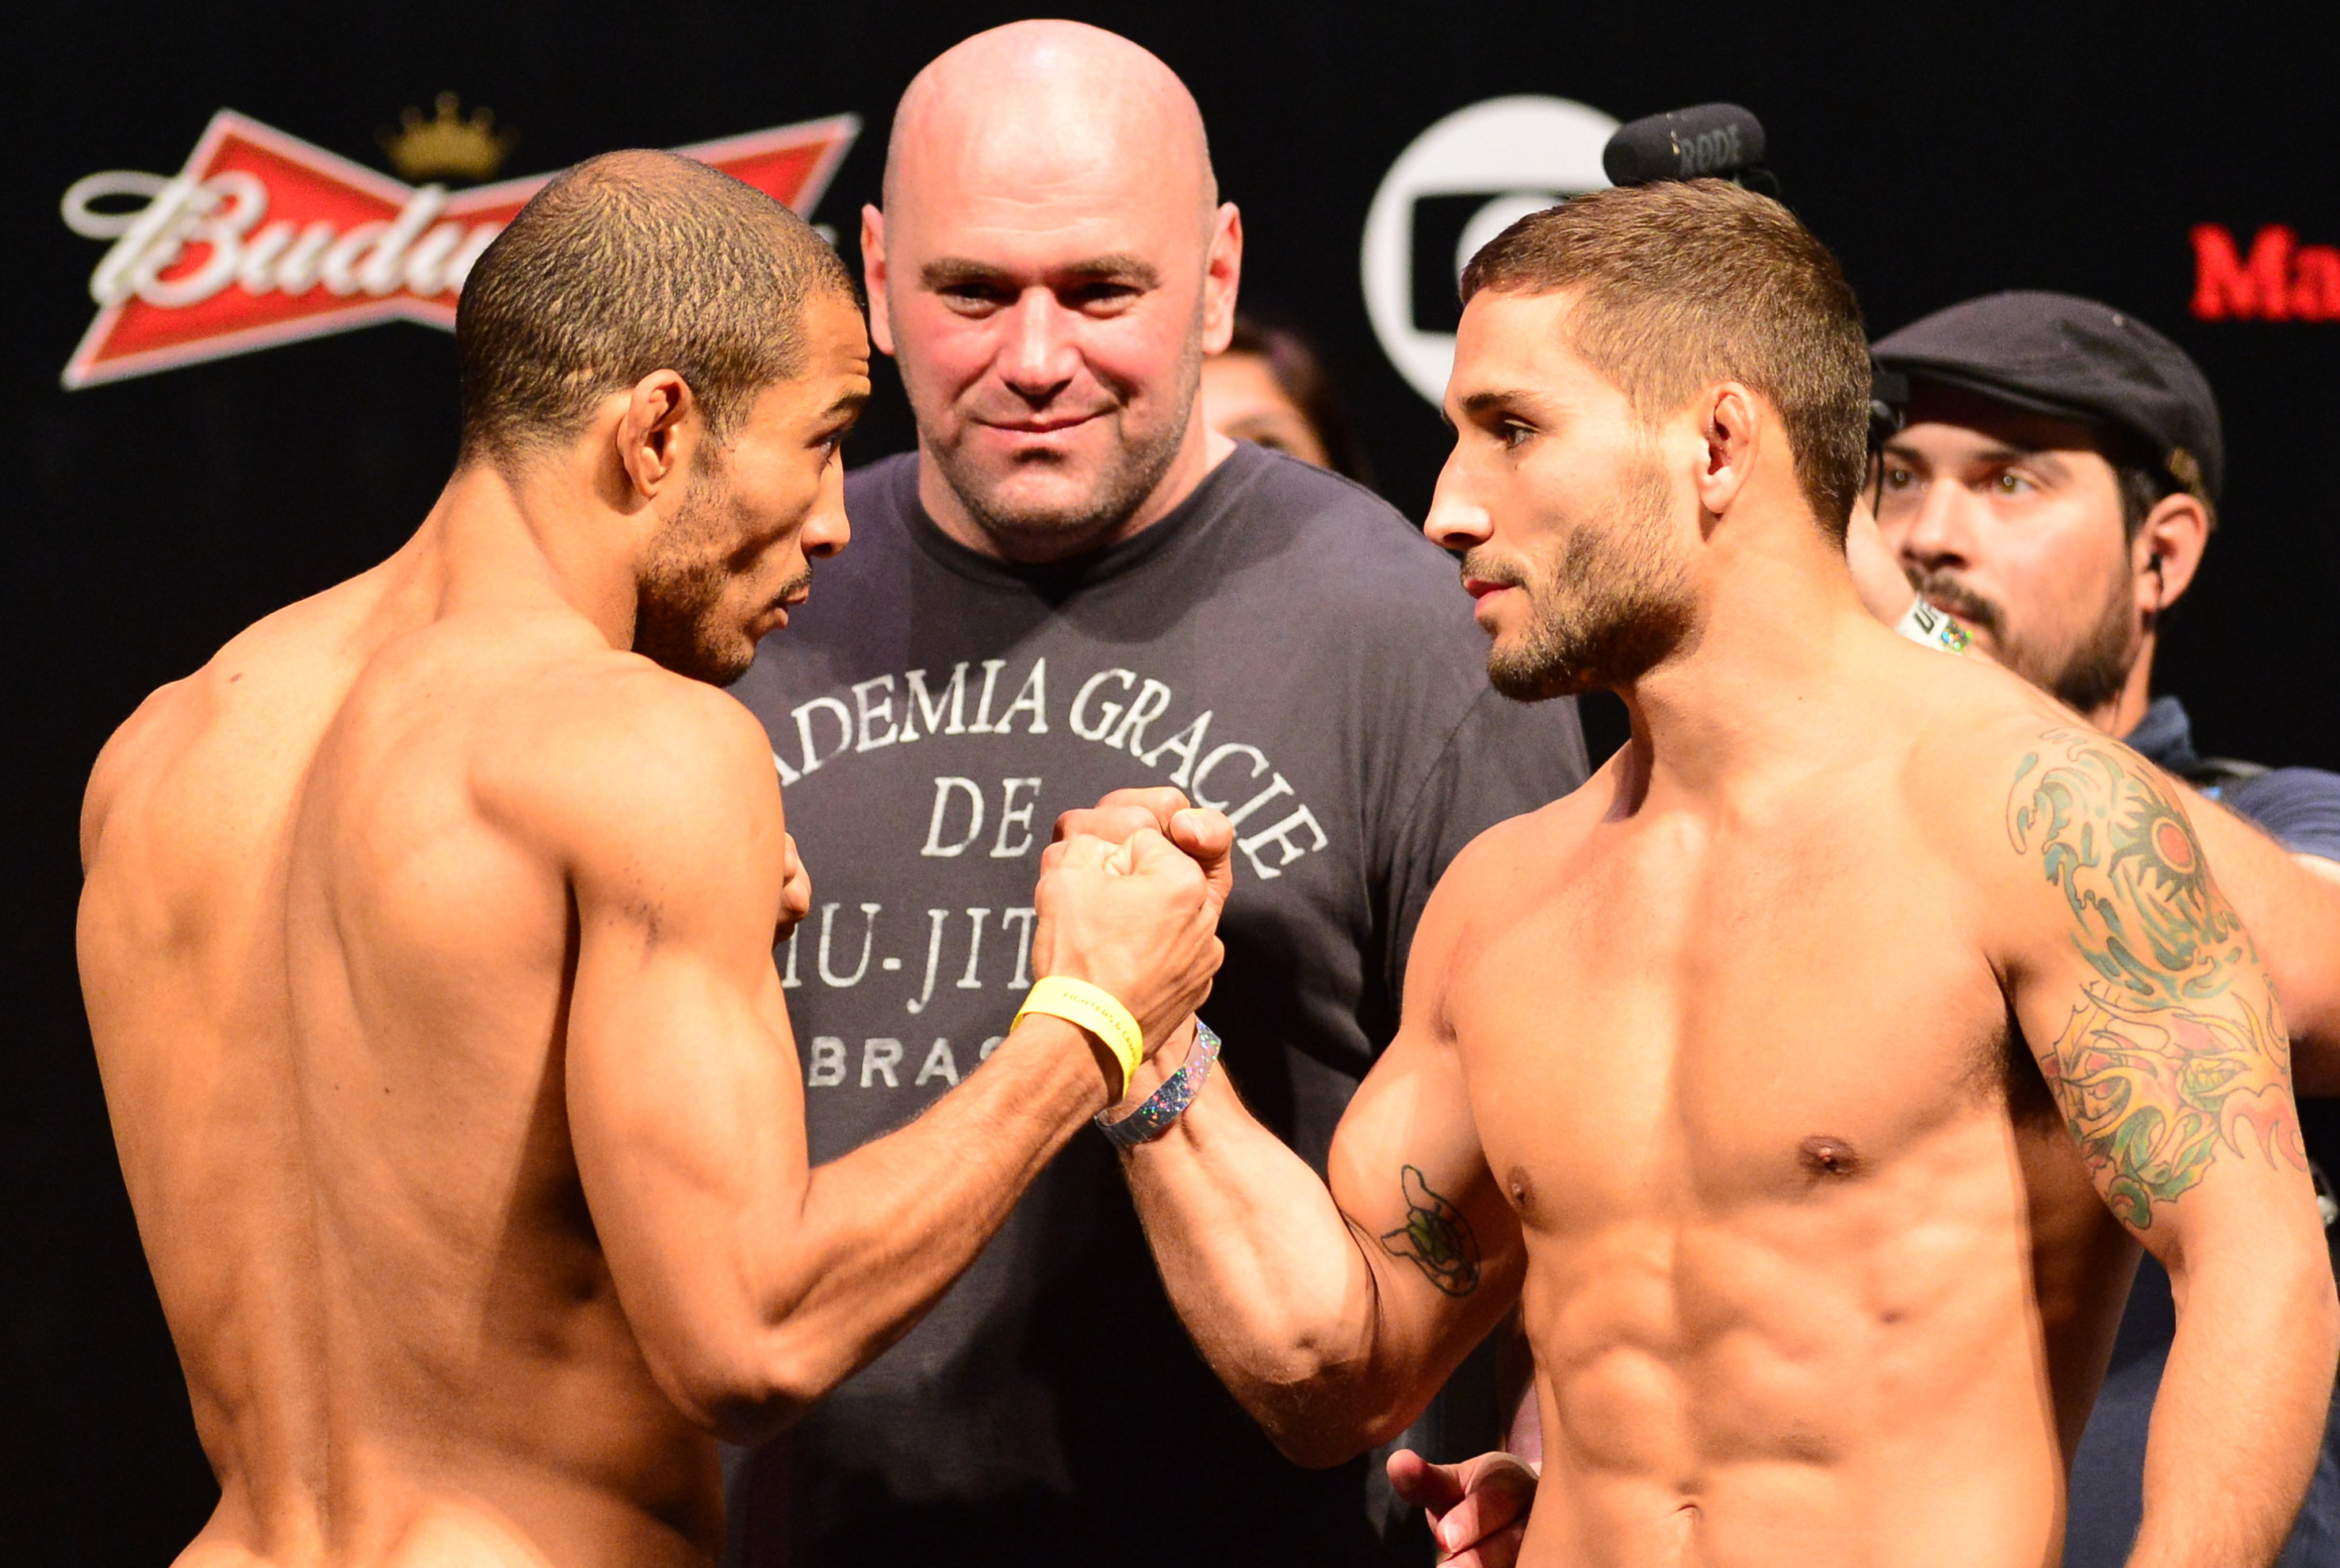 Aldo vs. Mendes 2 Results: Breaking Next Step for Both Fighters Report | Latest Videos and Highlights